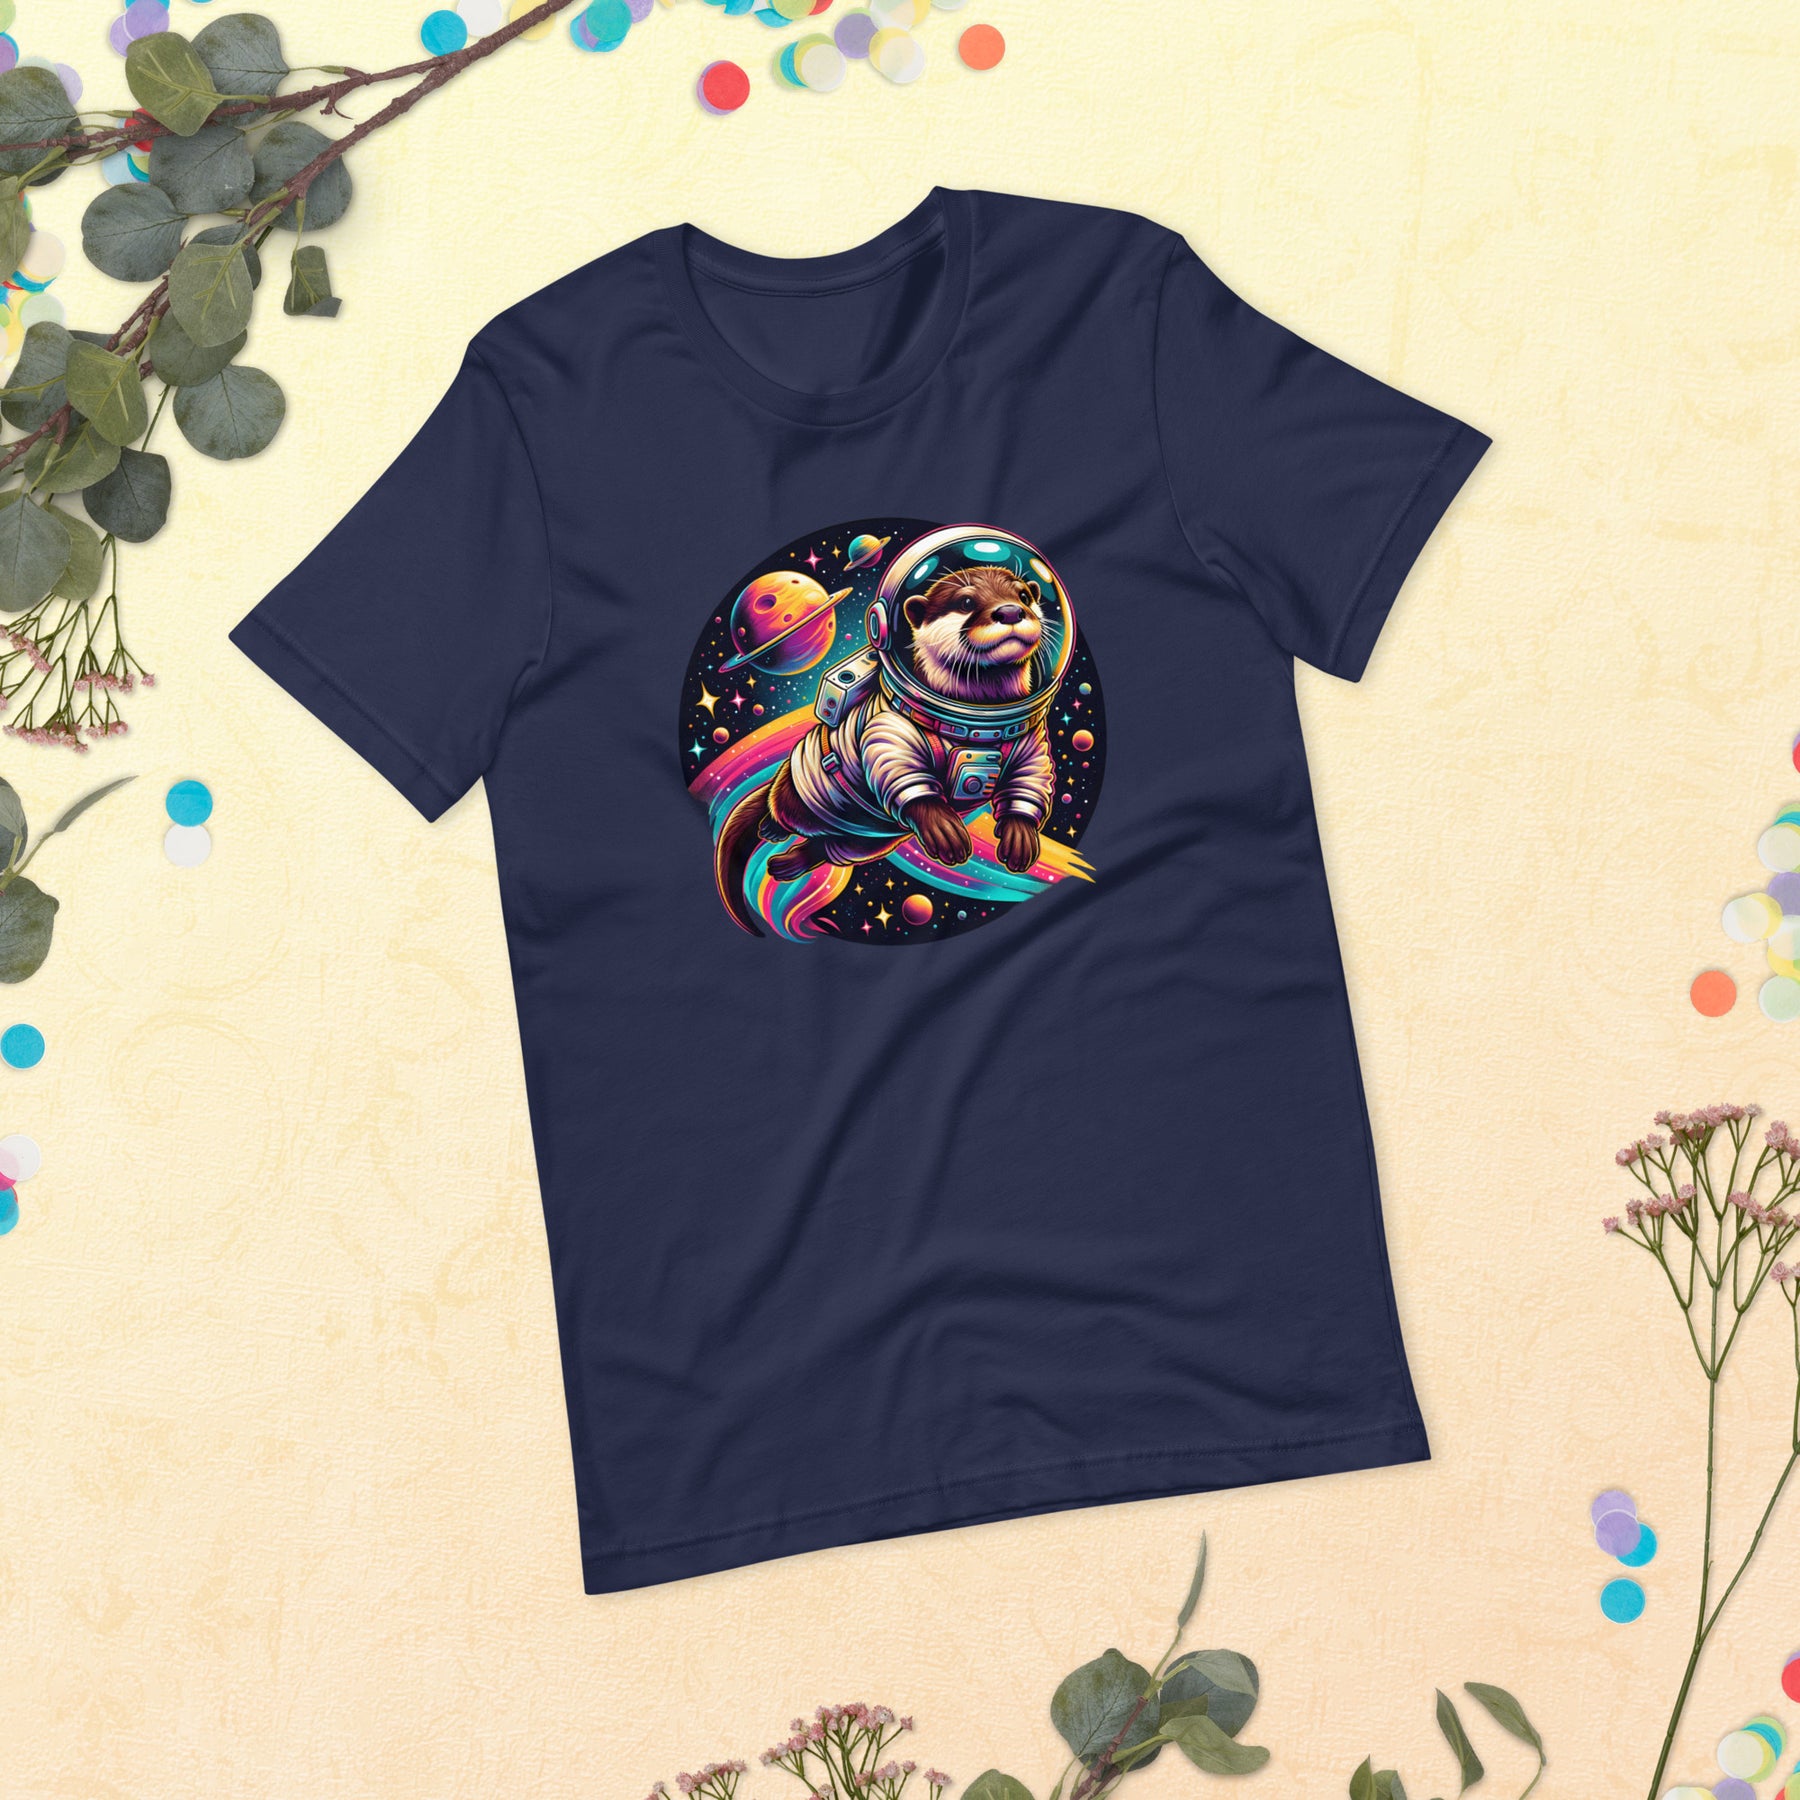 Funny Otter Space Shirt - Quirky Space Adventure Tee, Perfect Gift for Otter & Space Enthusiasts